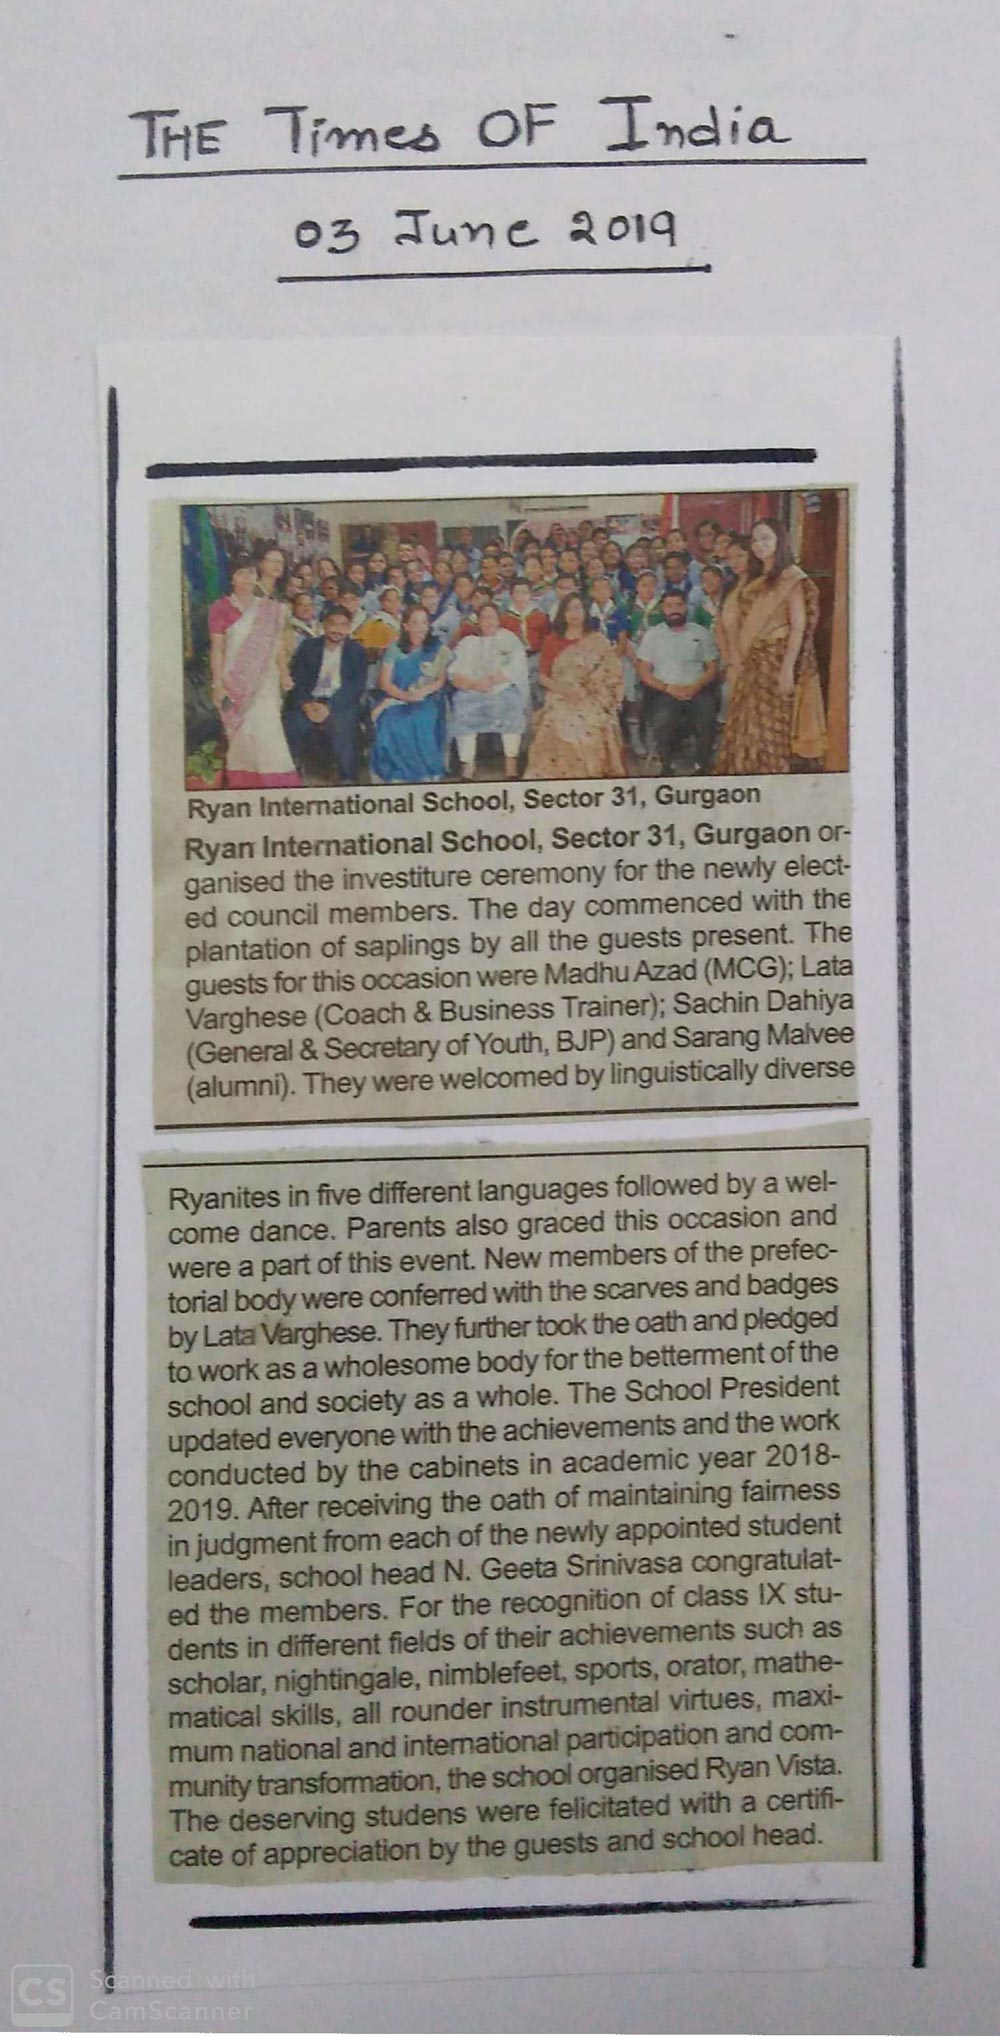 Organised the investiture ceremony for all the newly elected council members - Ryan International School, Sec 31 Gurgaon